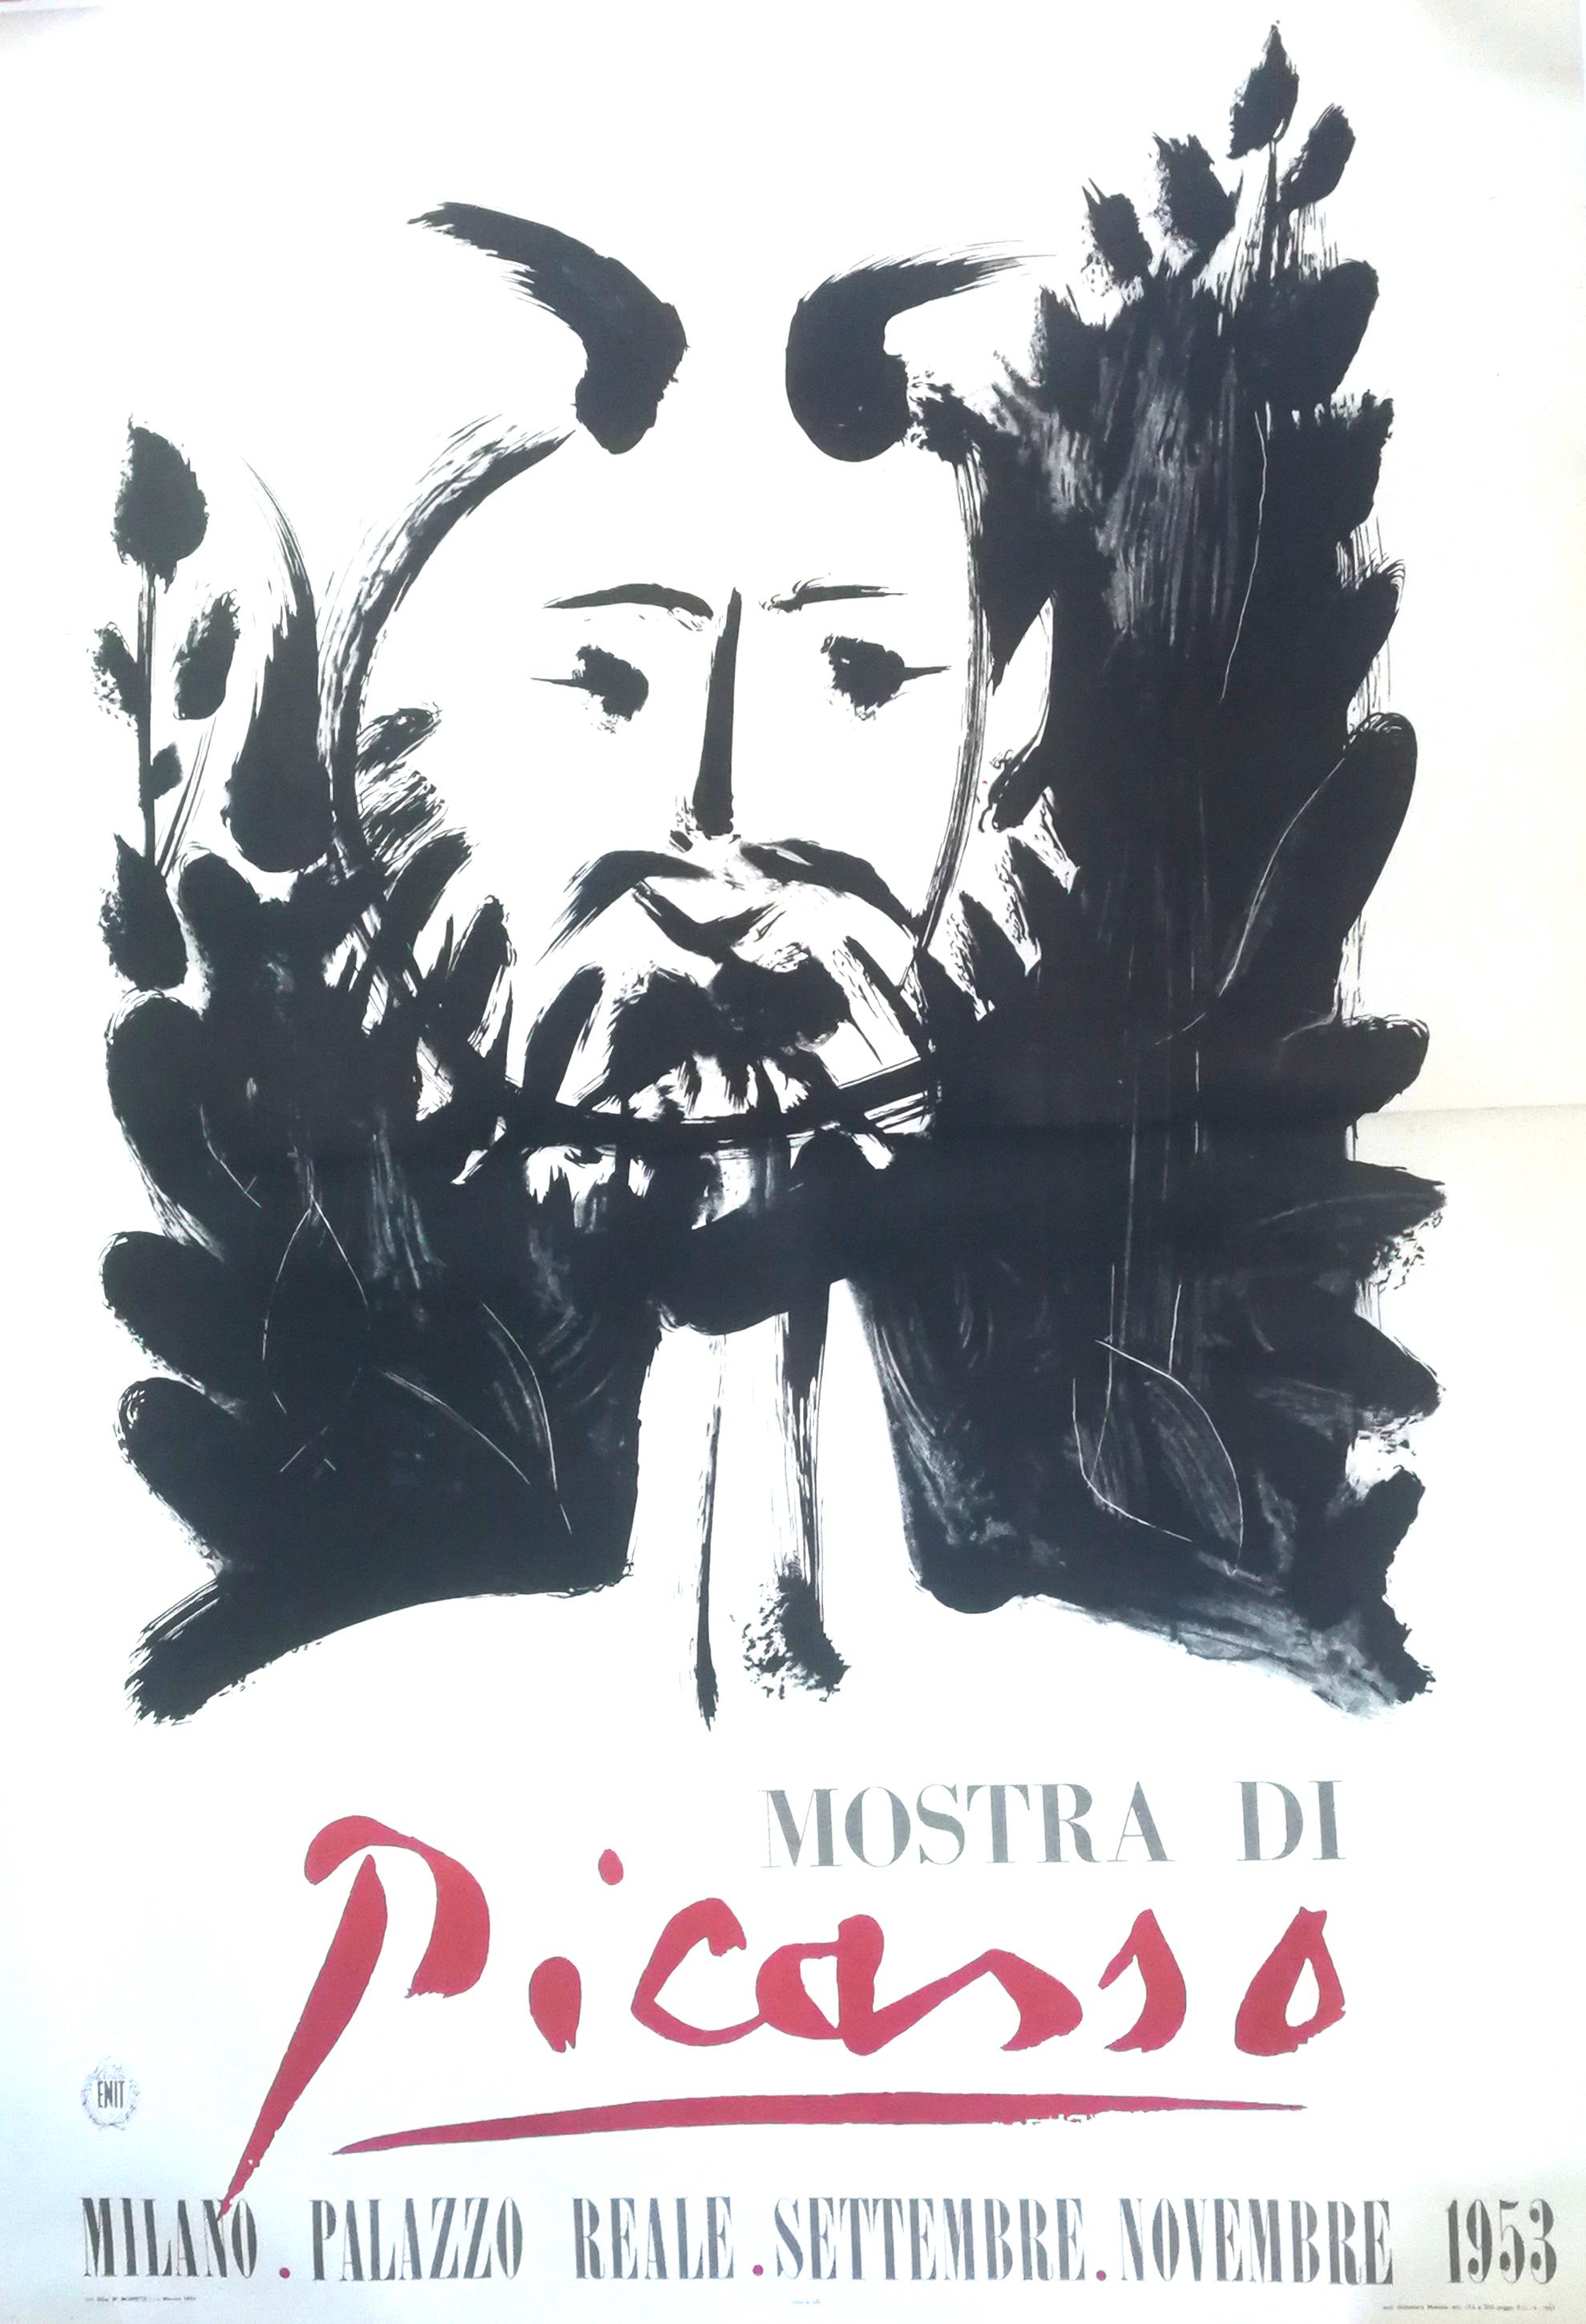 (after) Pablo Picasso Print – Faun – Vintage-Poster – Picasso-Ausstellung in Mailand 1953, Ausstellung in Mailand